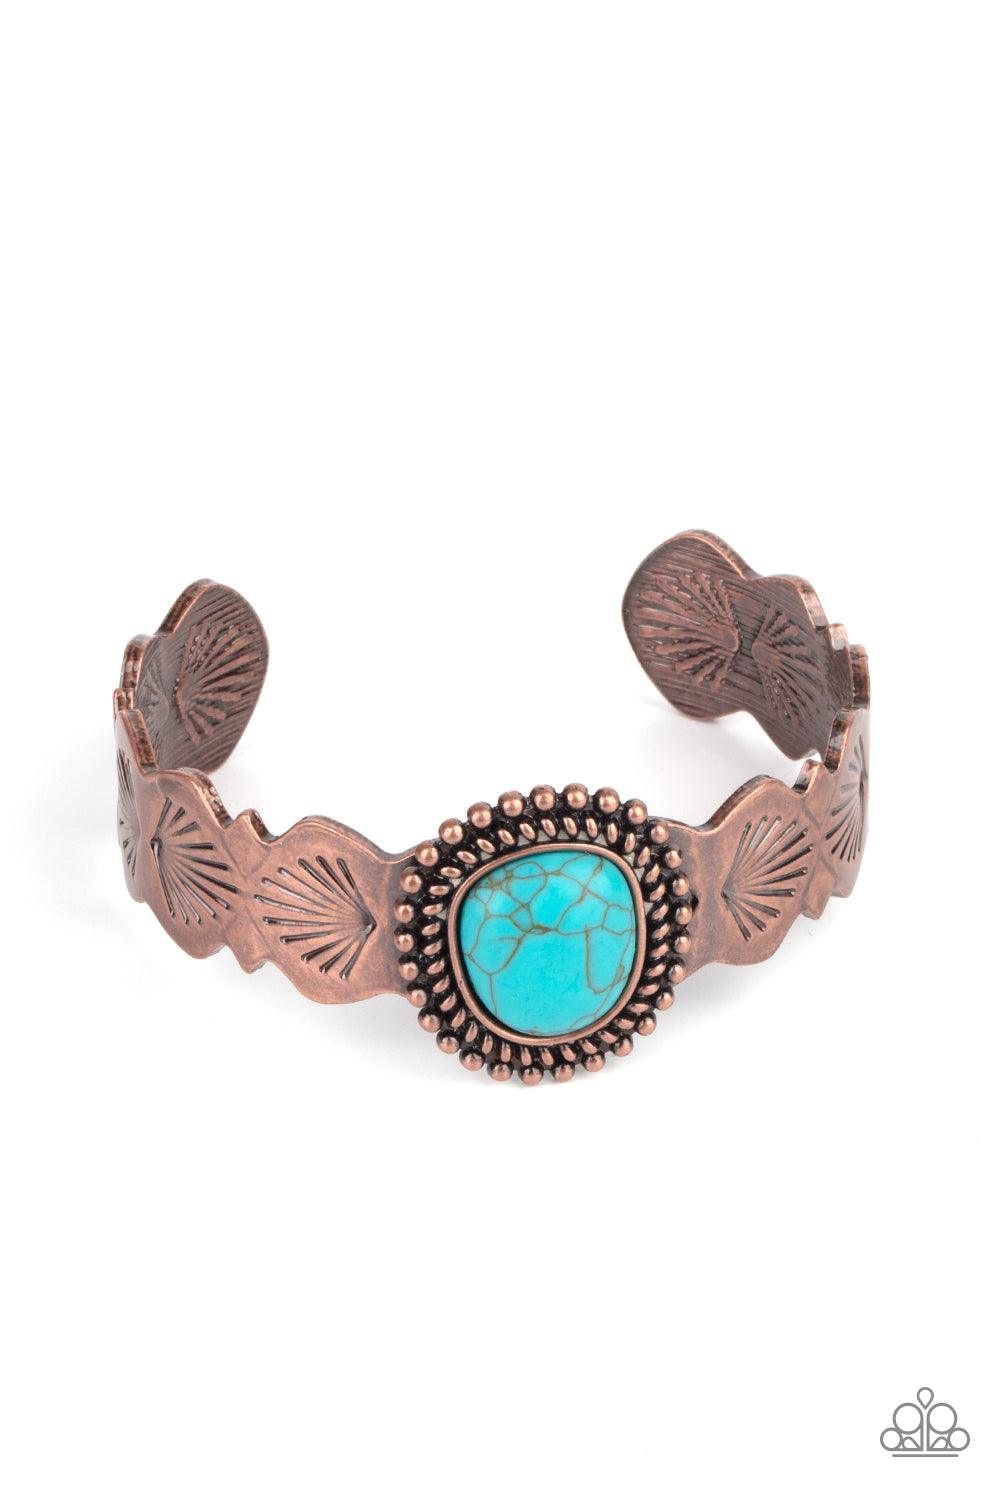 Paparazzi Accessories Oceanic Oracle - Copper An asymmetrical turquoise stone is pressed into the center of an abstract studded copper frame. The earthy stone piece sits off-center atop a scalloped copper cuff stamped in seashell patterns, creating a whim